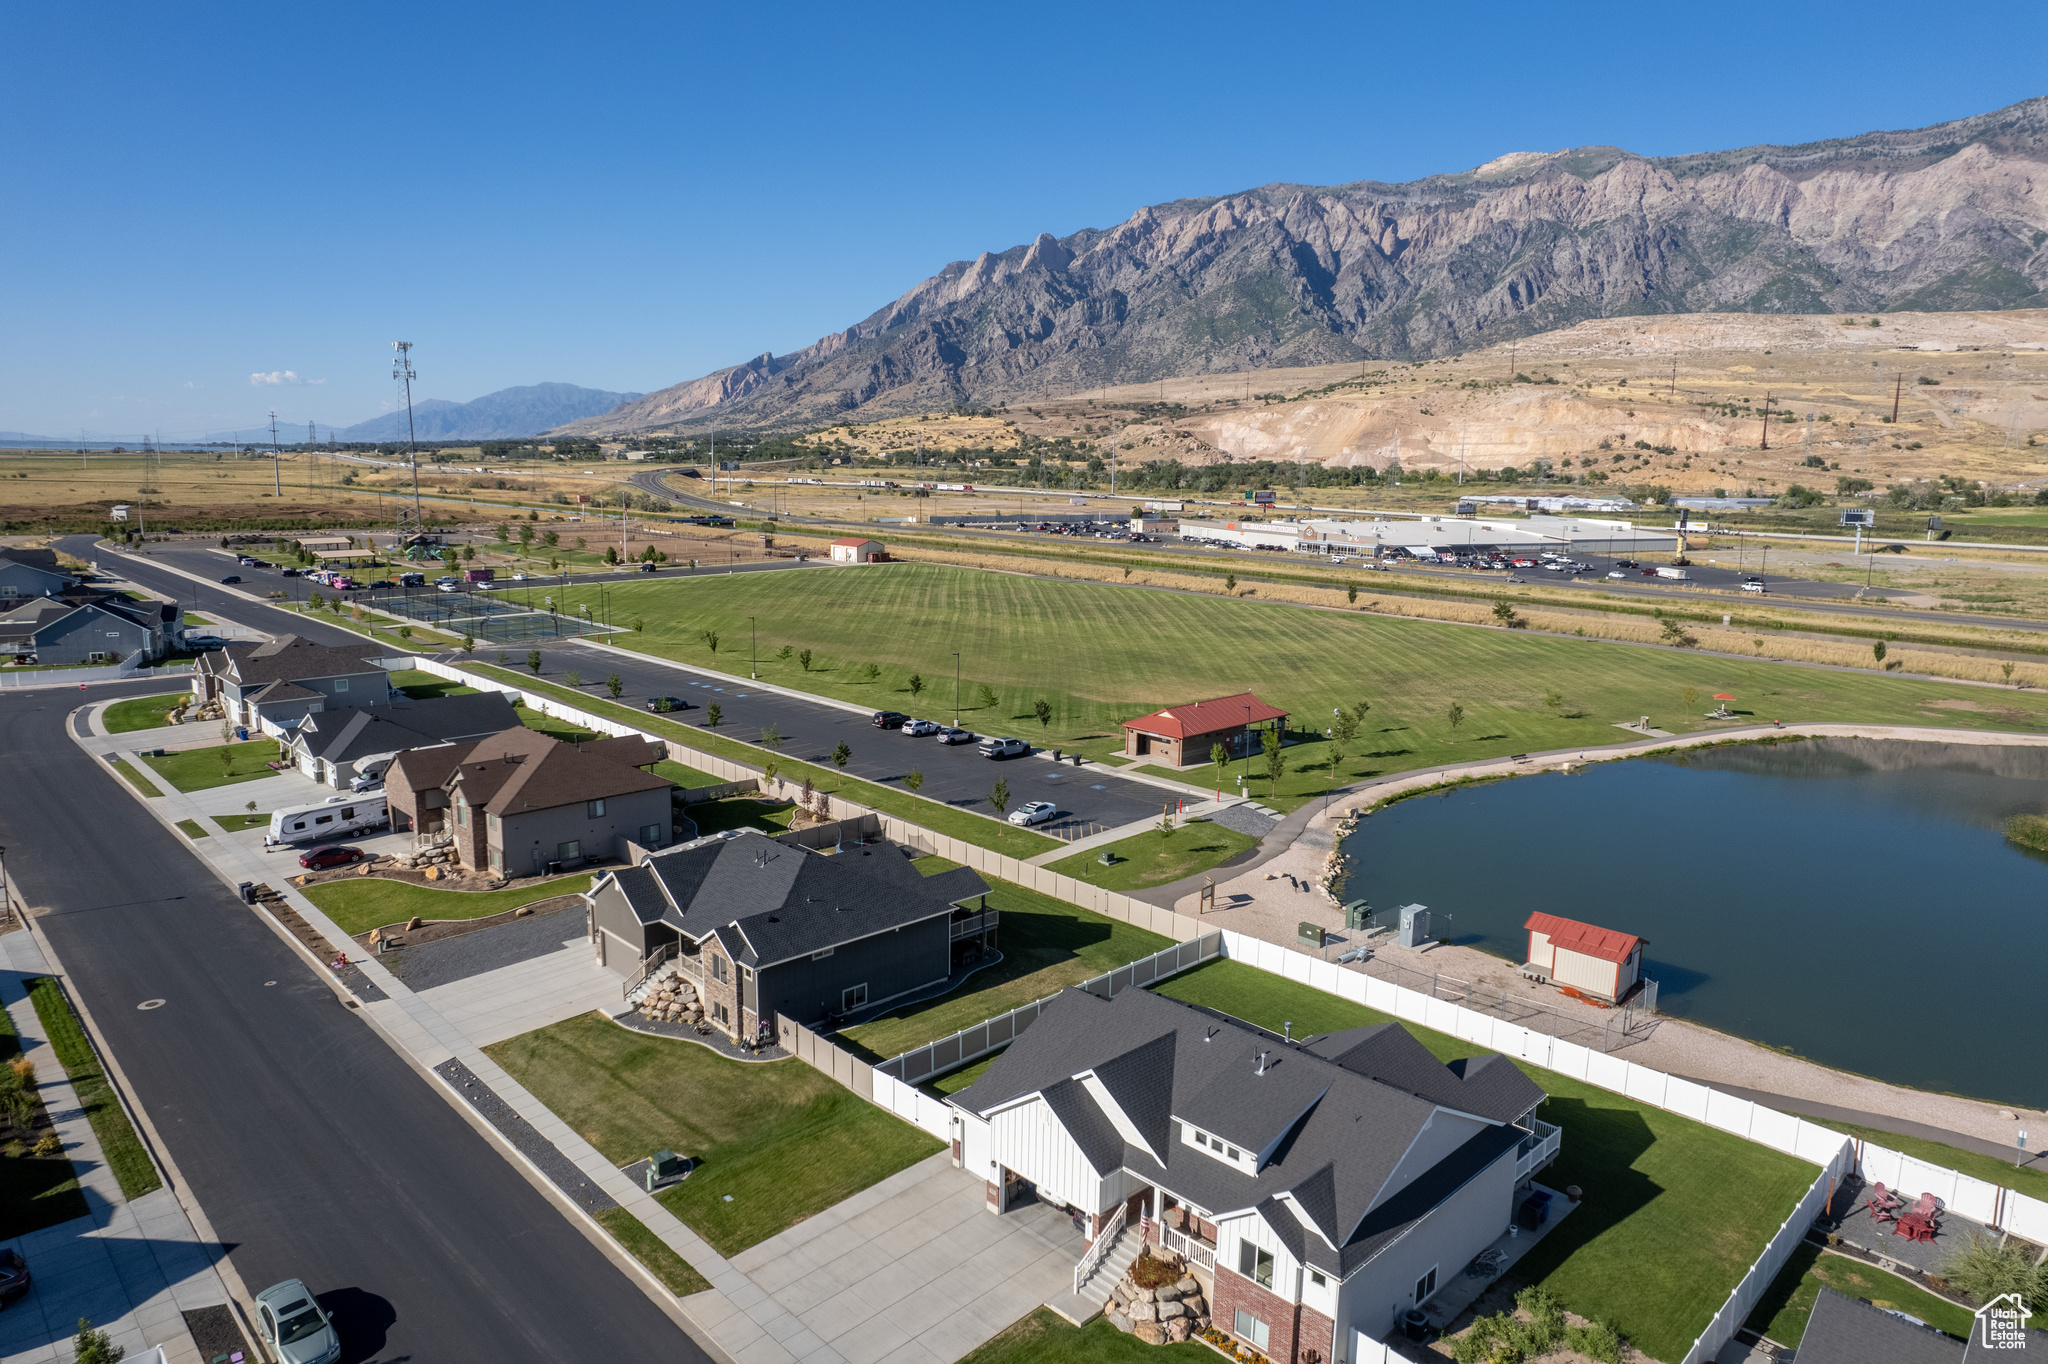 Aerial view with family park and mountain views